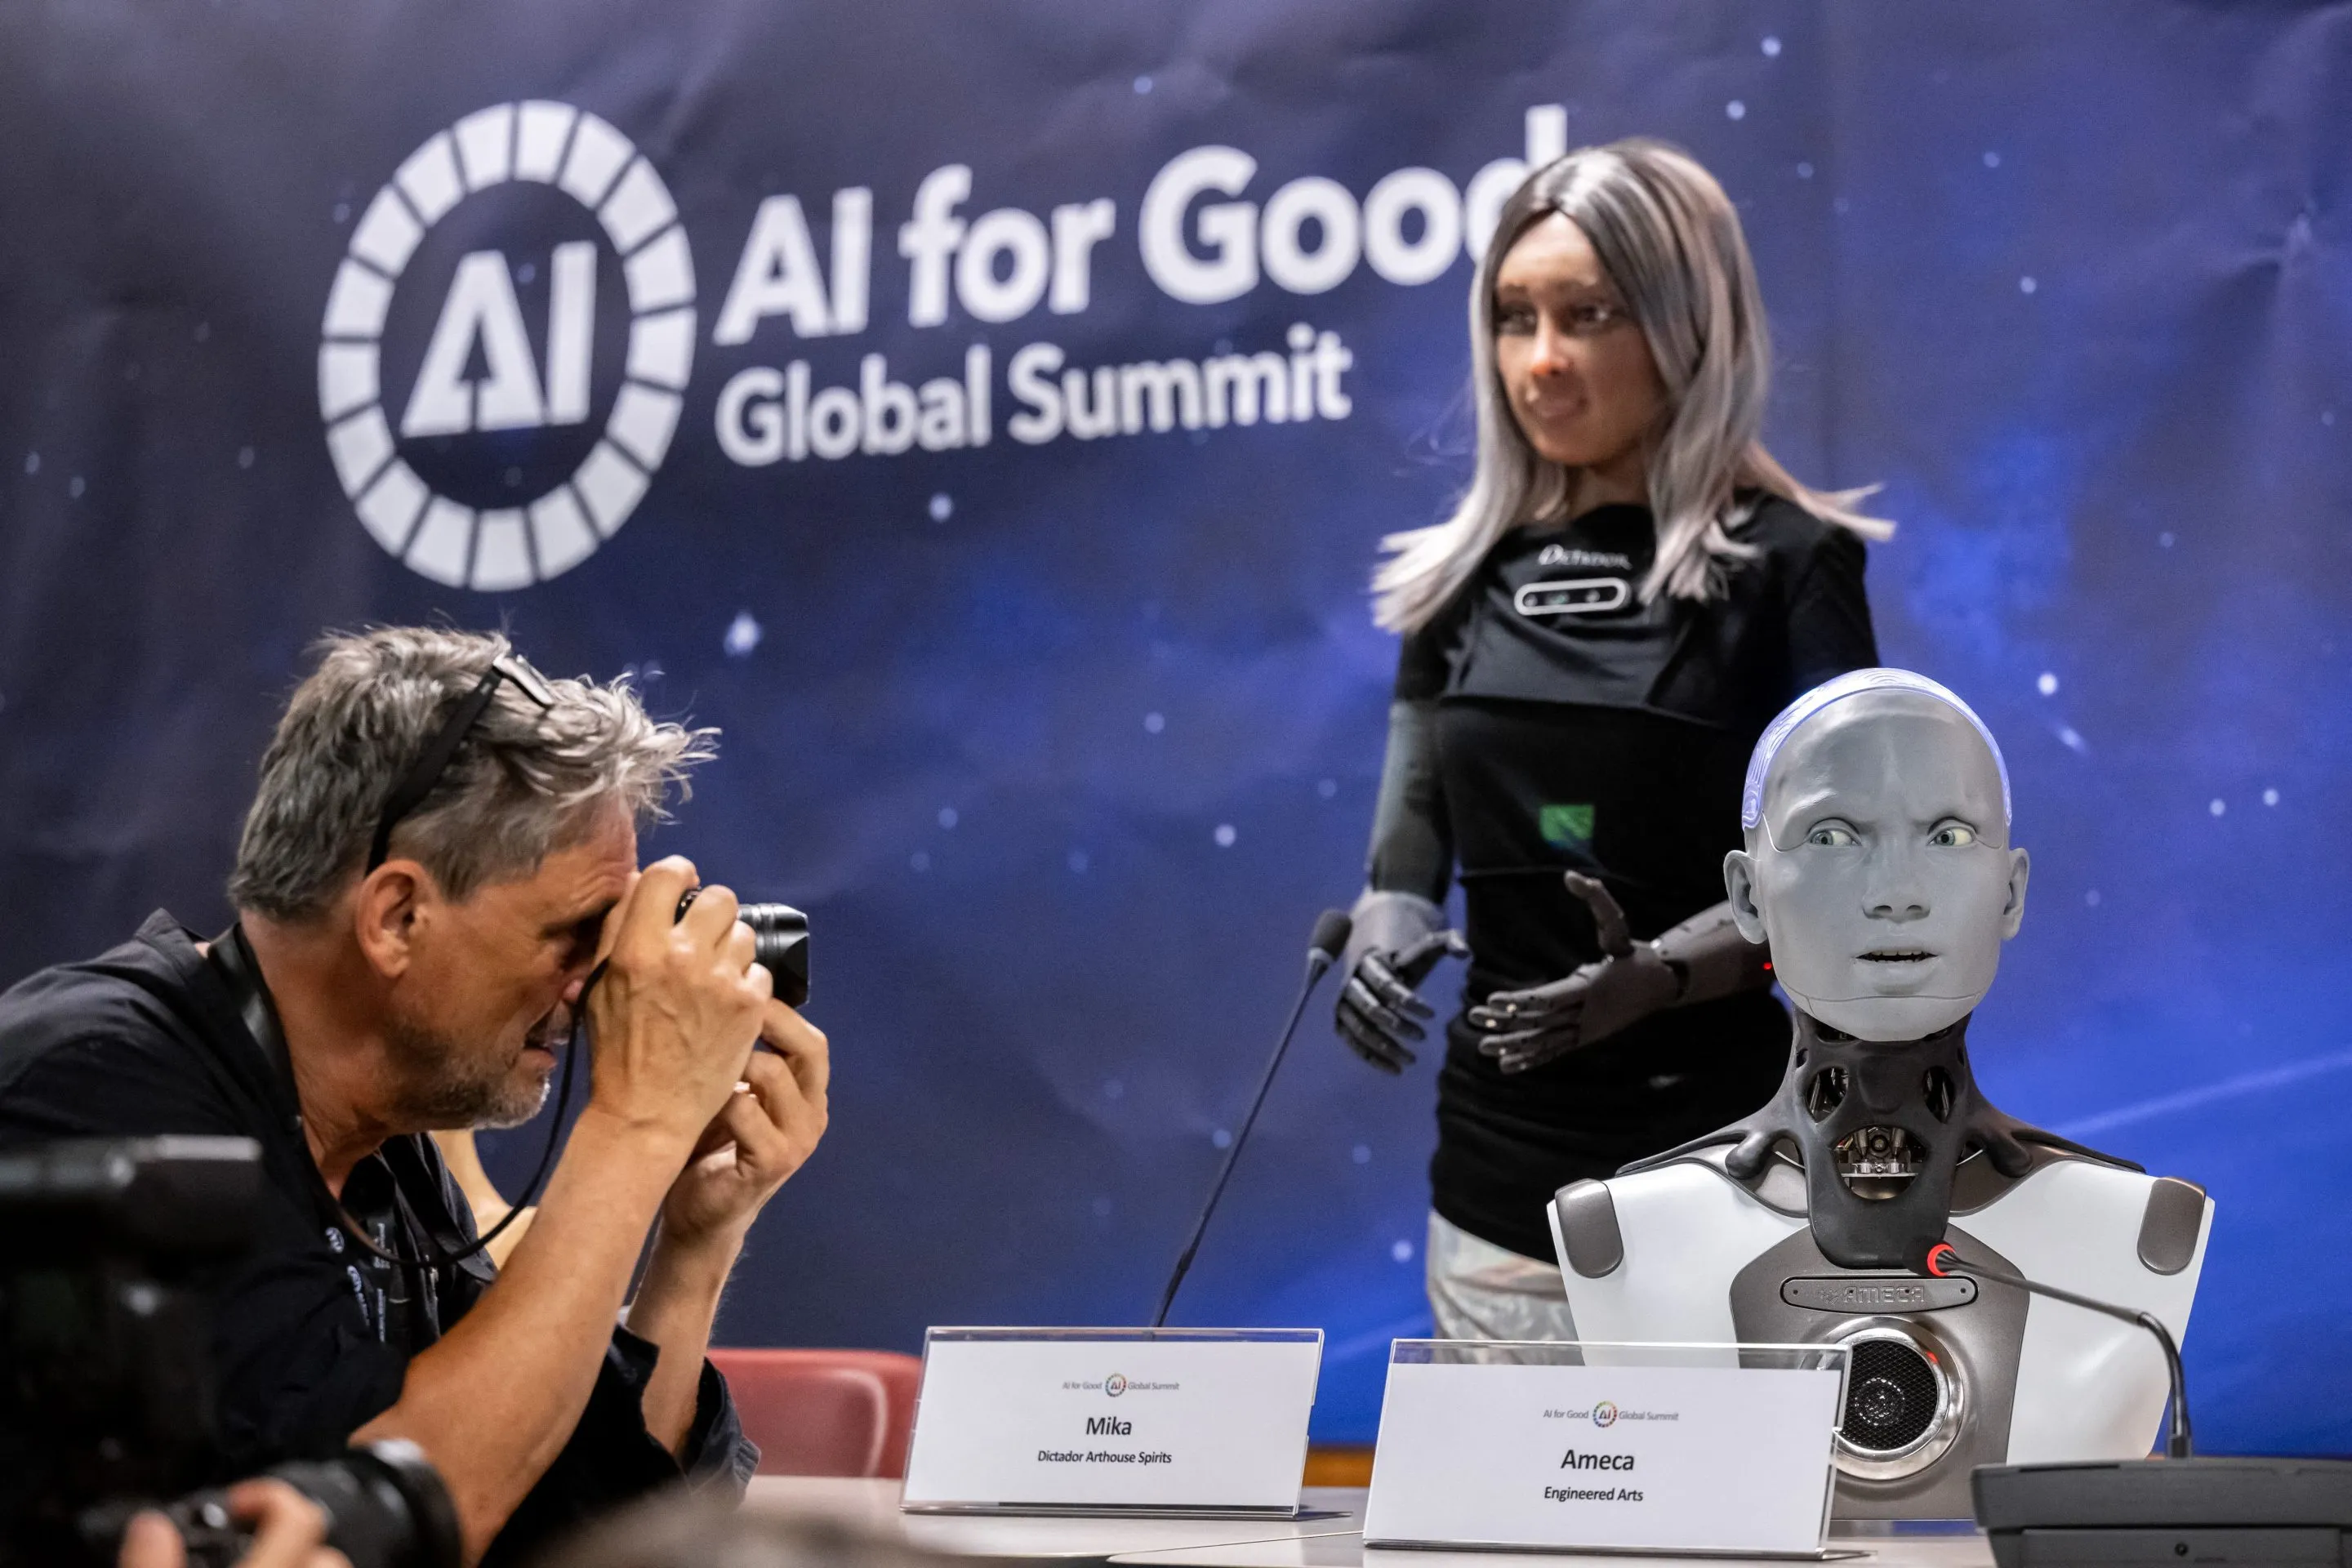 World's First AI-Powered Humanoid Robot CEO Enters the Boardroom